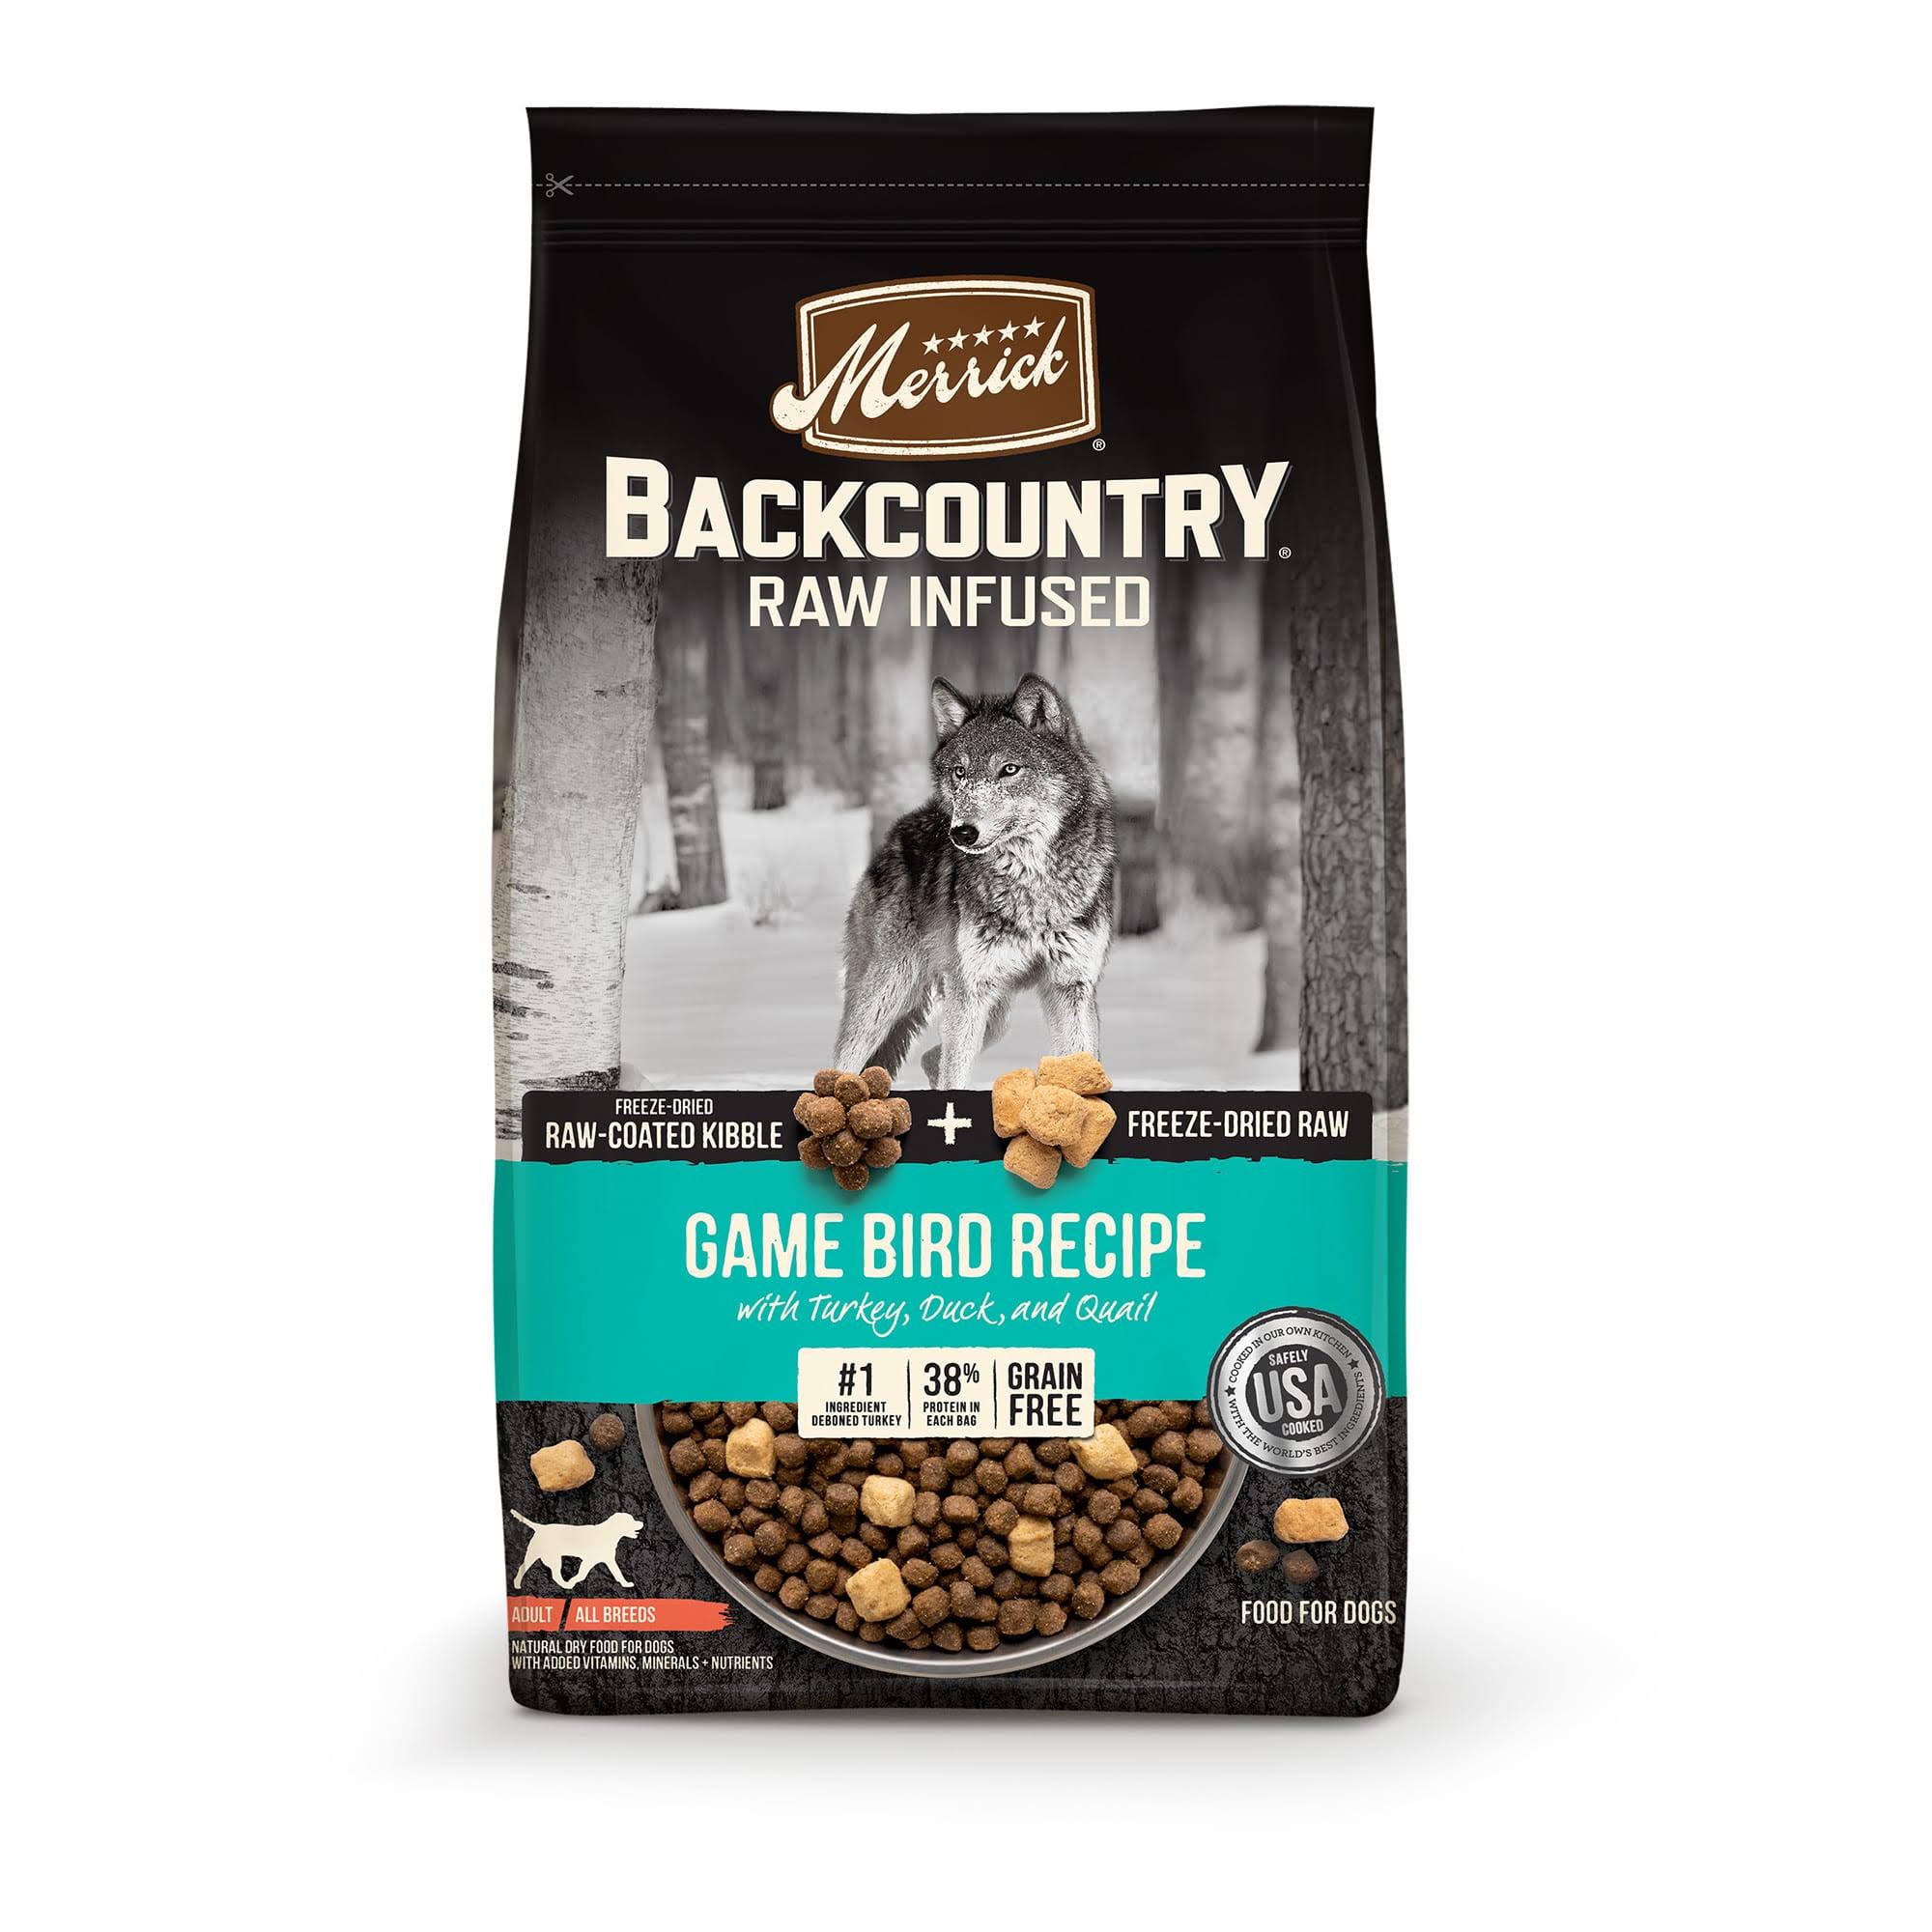 Merrick Backcountry Freeze-Dried Raw Infused Grain-Free Game Bird Recipe With Turkey, Duck, & Quail Dry Dog Food 20 LB